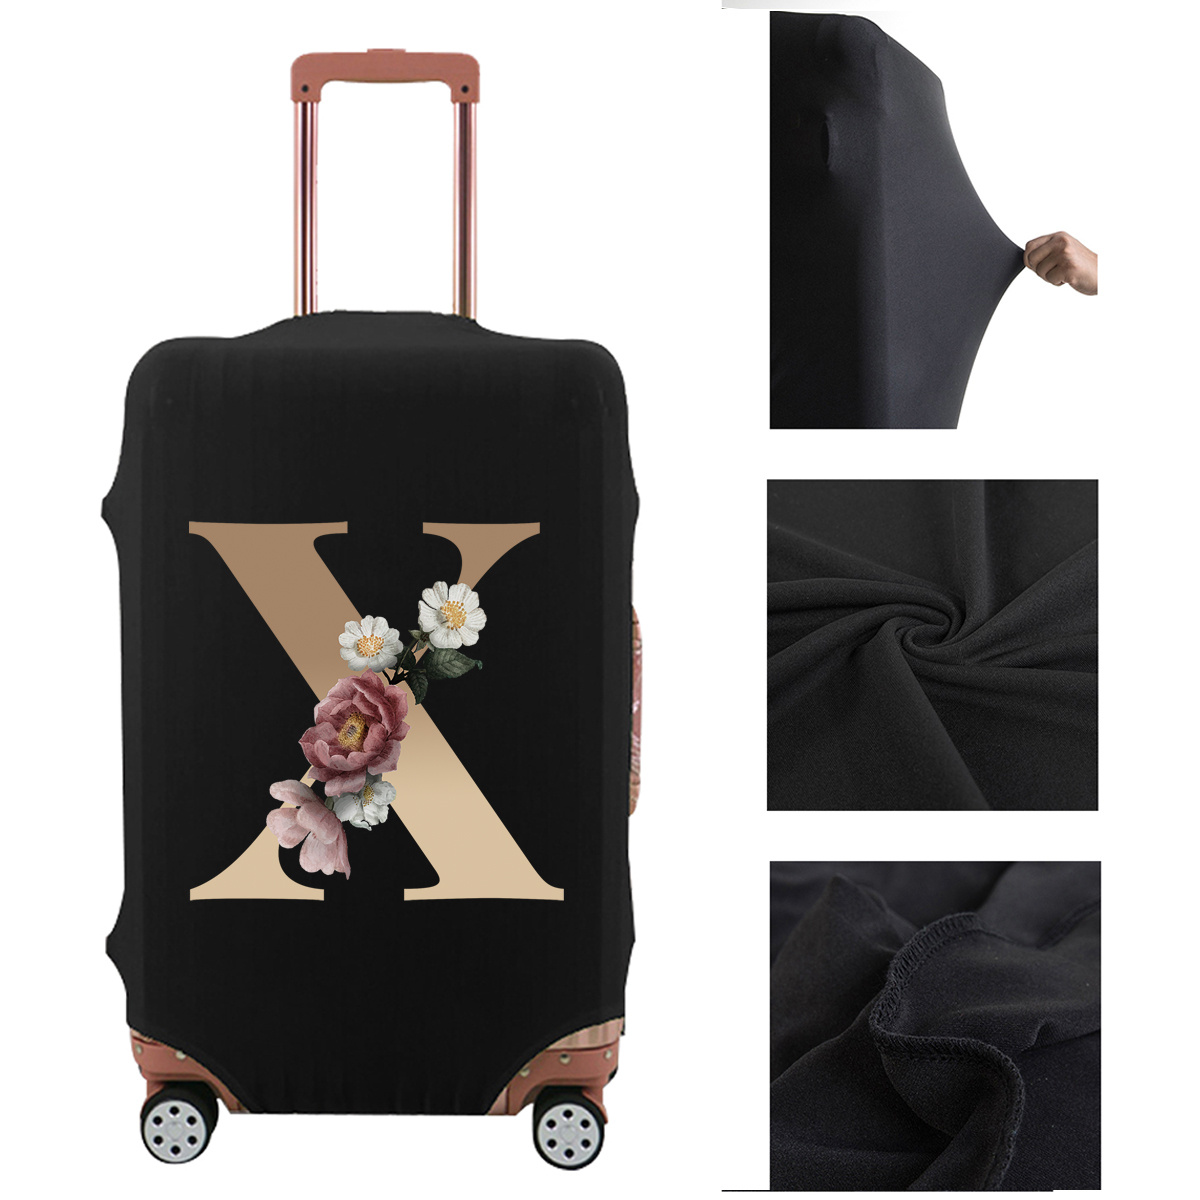 vuitton luggage protective